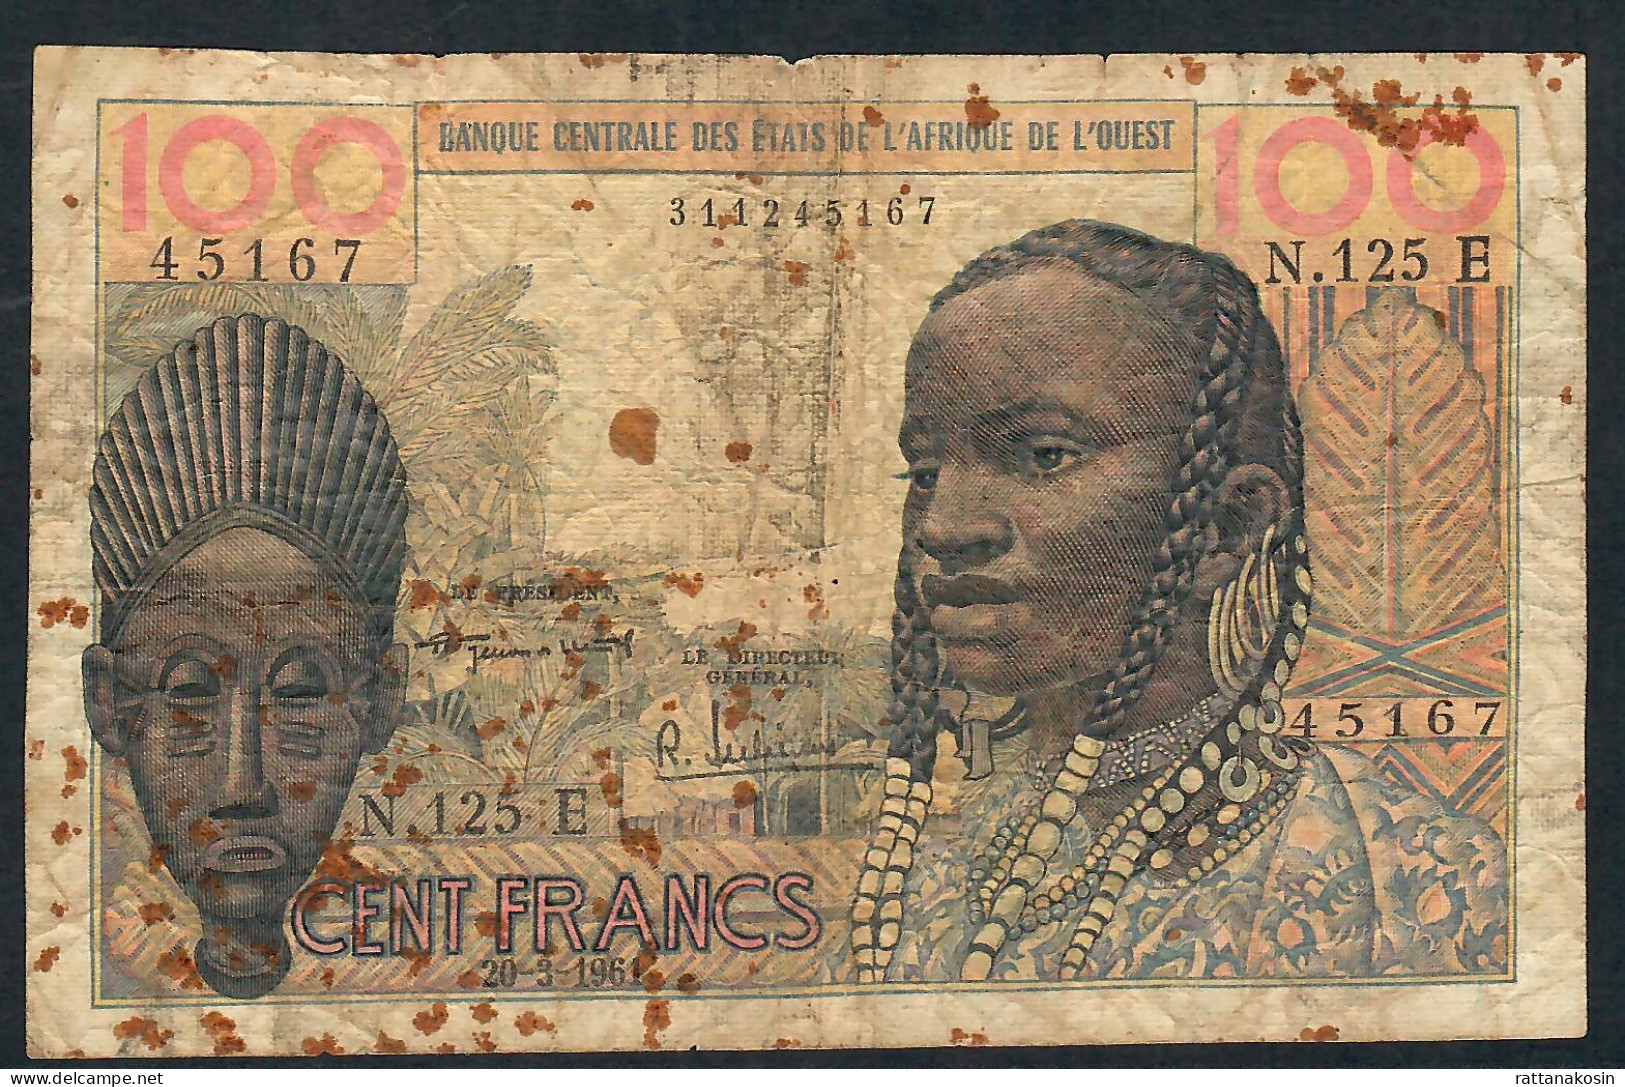 W.A.S. MAURITANIA P501Ea 100 FRANCS 20.3.1961 SIGNATURE 1 VERY RARE FIRST DATE    FINE - West African States